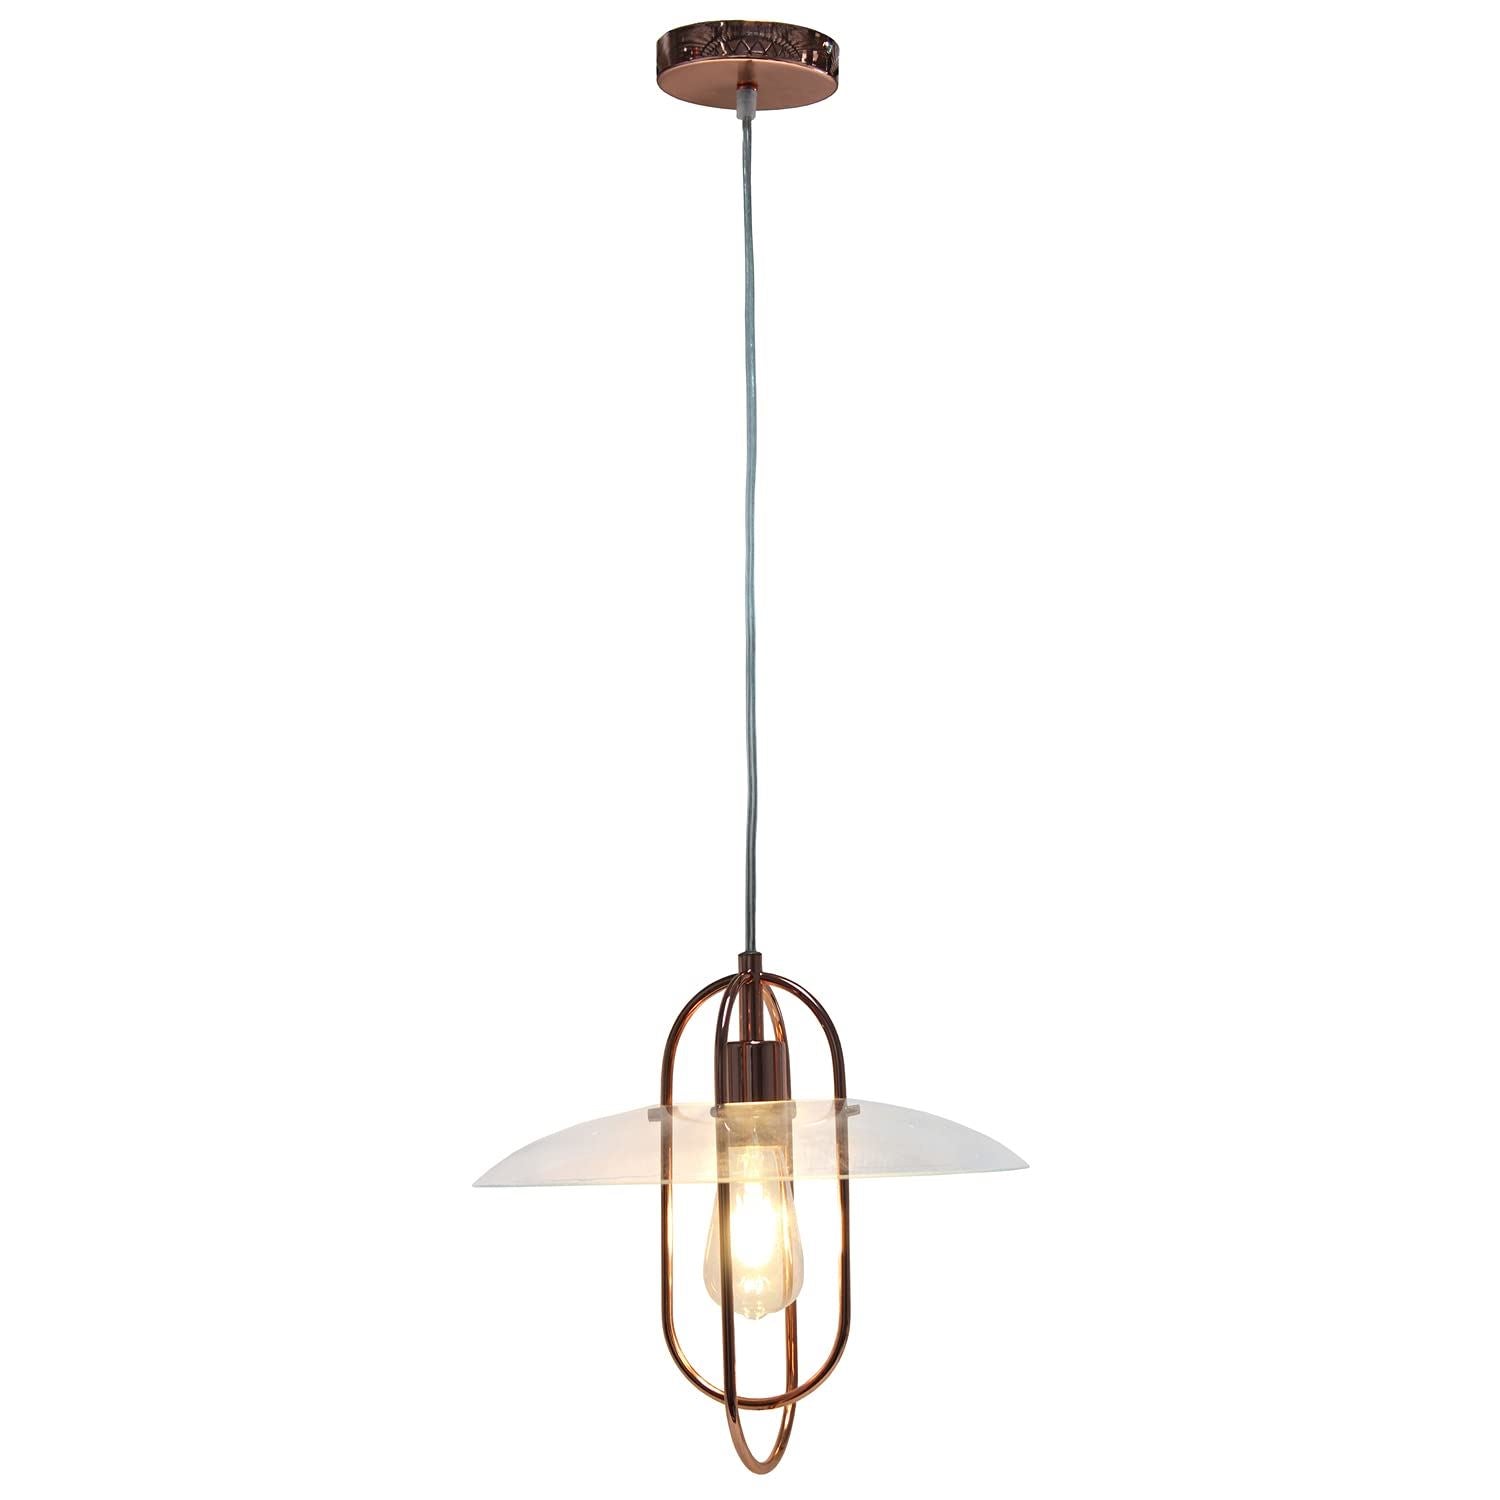 Lalia Home 1 Light Elongated Design Metal Pendant Light with Clear Glass Shade -